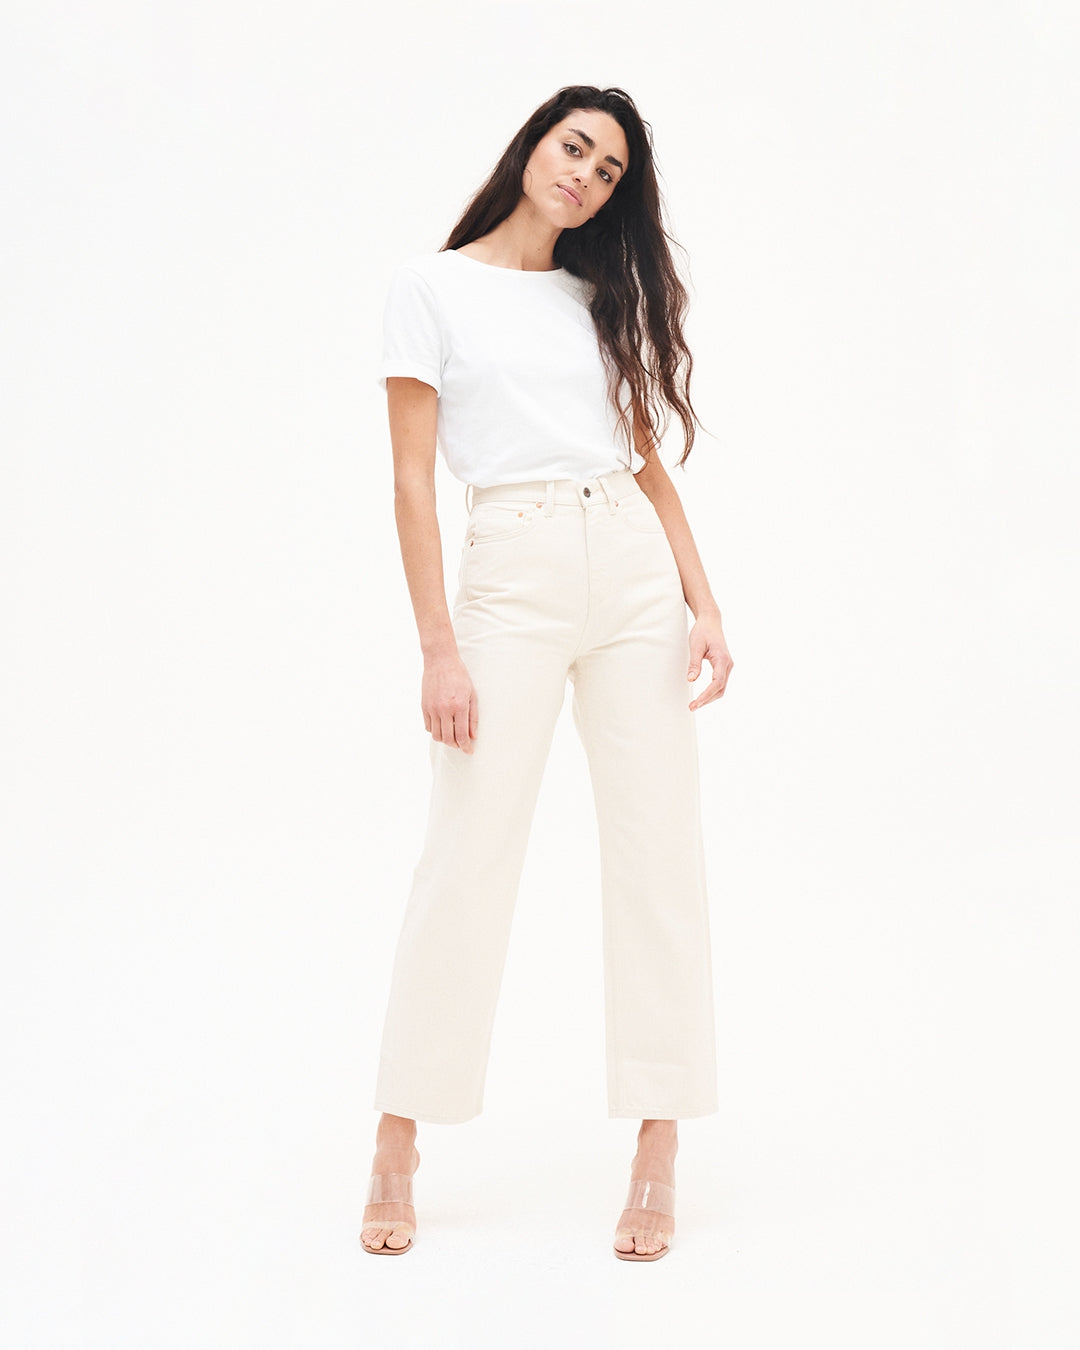 Bobbie Barrel undyed jeans made from organic cotton by Kuyichi